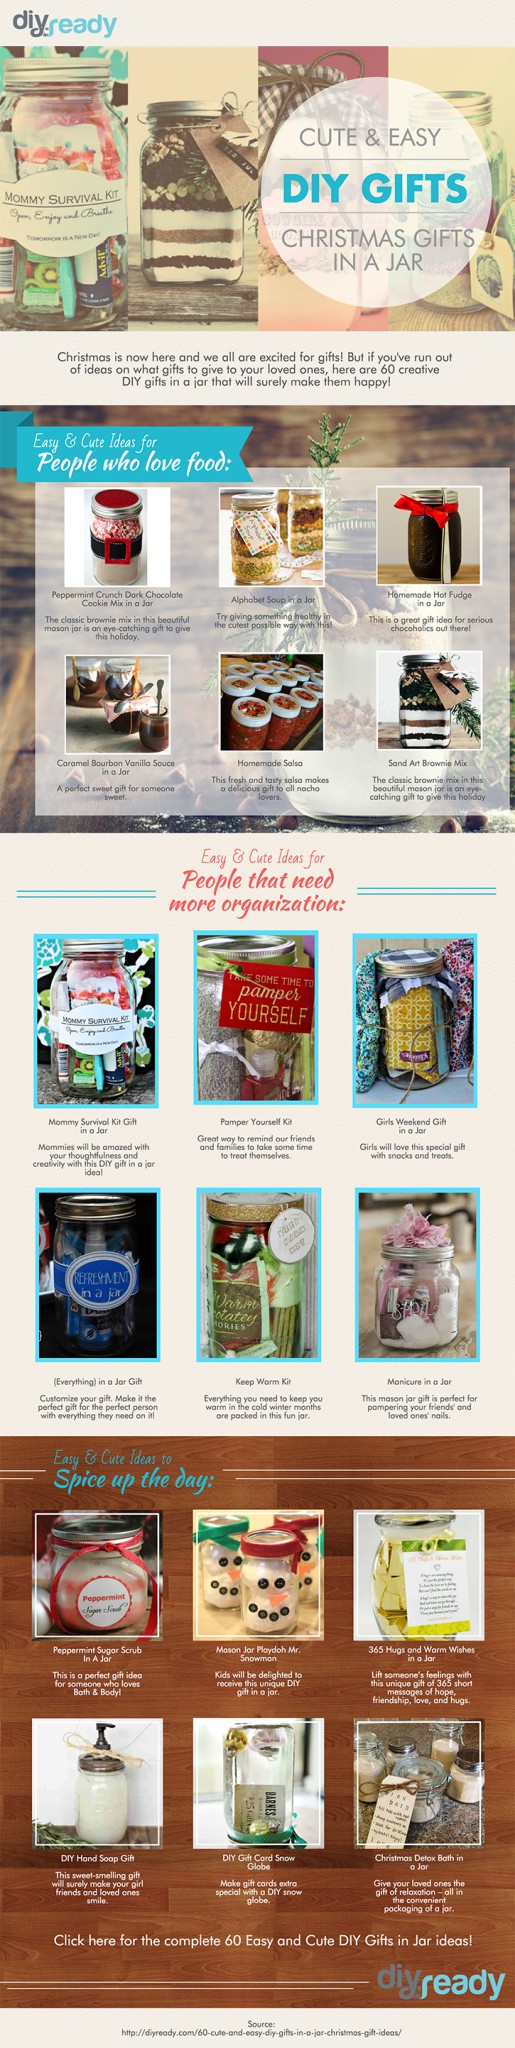 Cute and Easy Diy Gifts | Chrsitmas Gifts in a Jar, check it out at https://diyprojects.com/cute-and-easy-diy-gifts